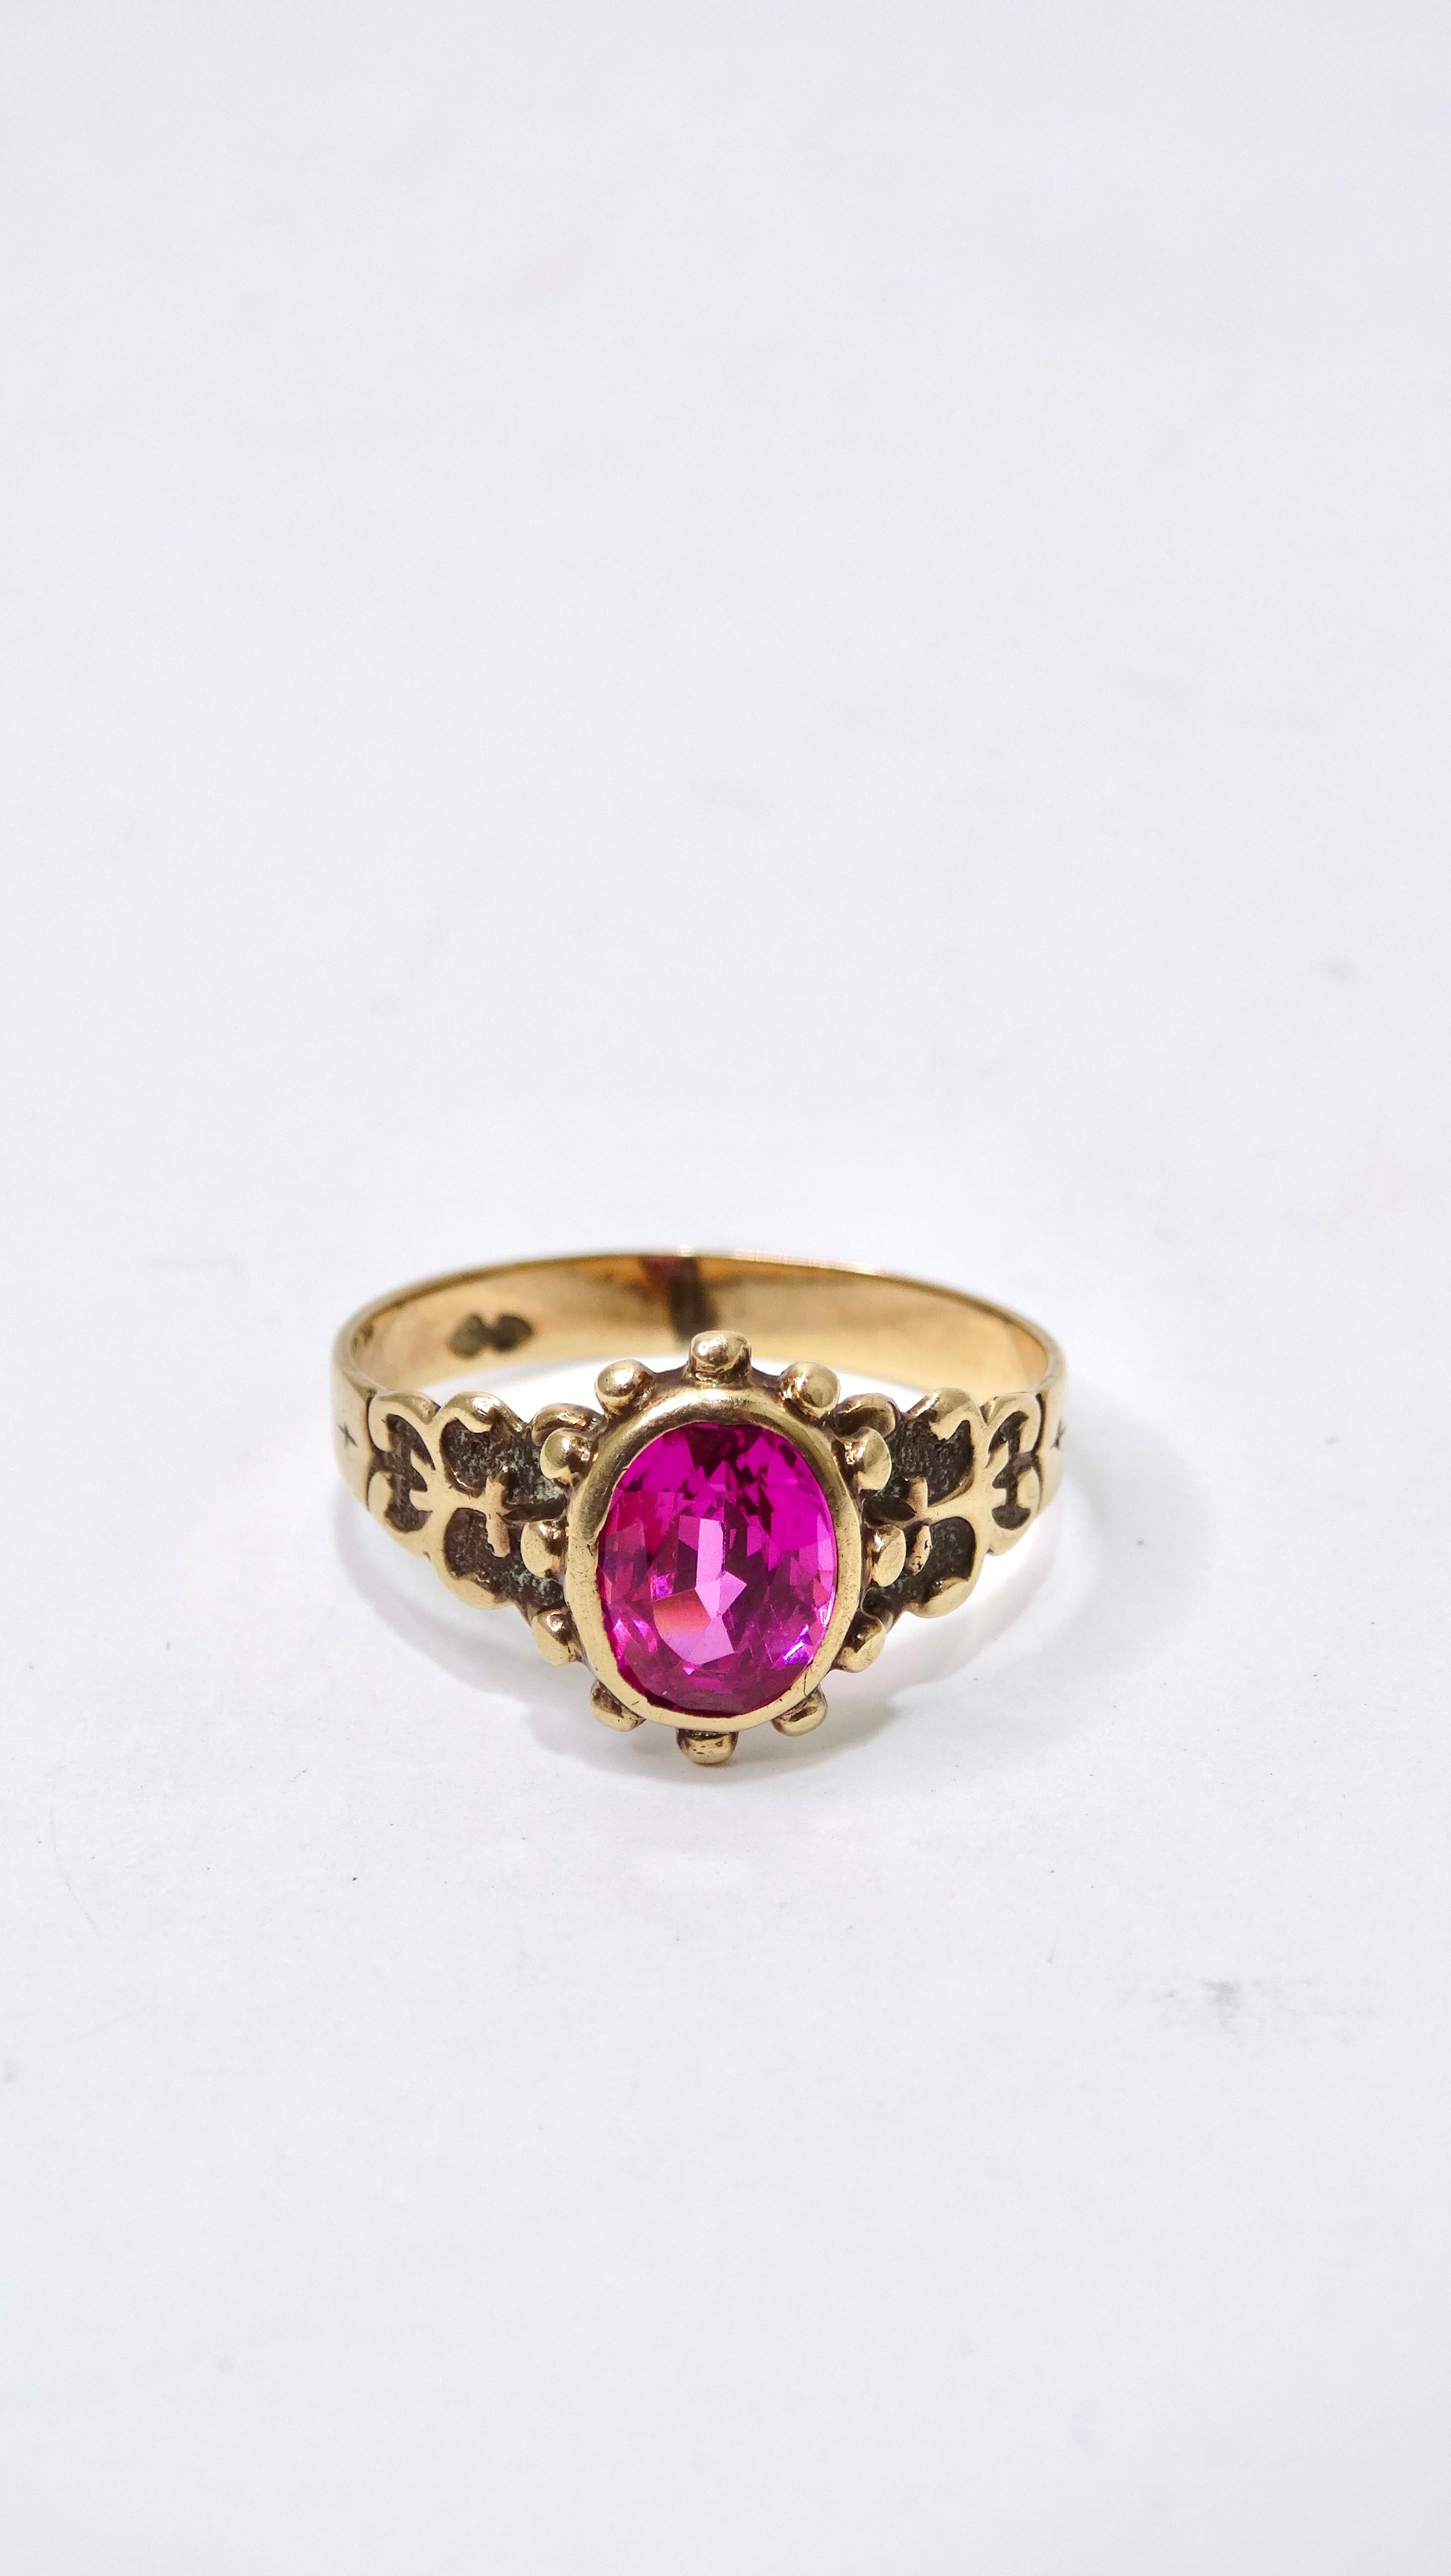 This impeccably designed ring can be yours today! Don't miss your chance to get your hands on this large Ruby stone in an oval cut. For centuries, Rubies have signified passion, protection, and wealth making it a symbol of love and committment. This